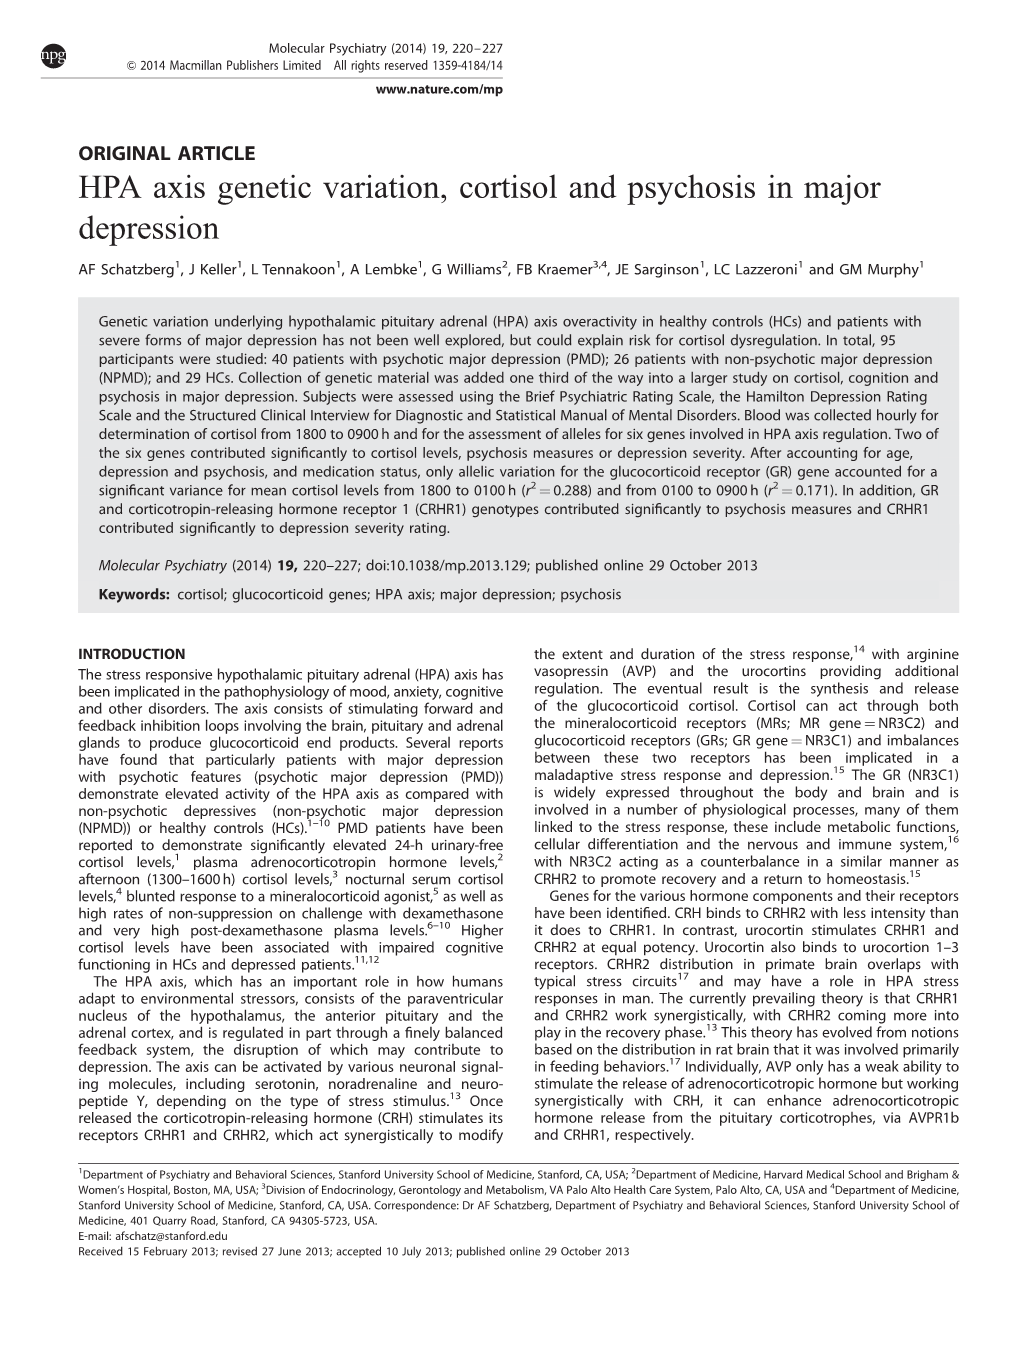 HPA Axis Genetic Variation, Cortisol and Psychosis in Major Depression